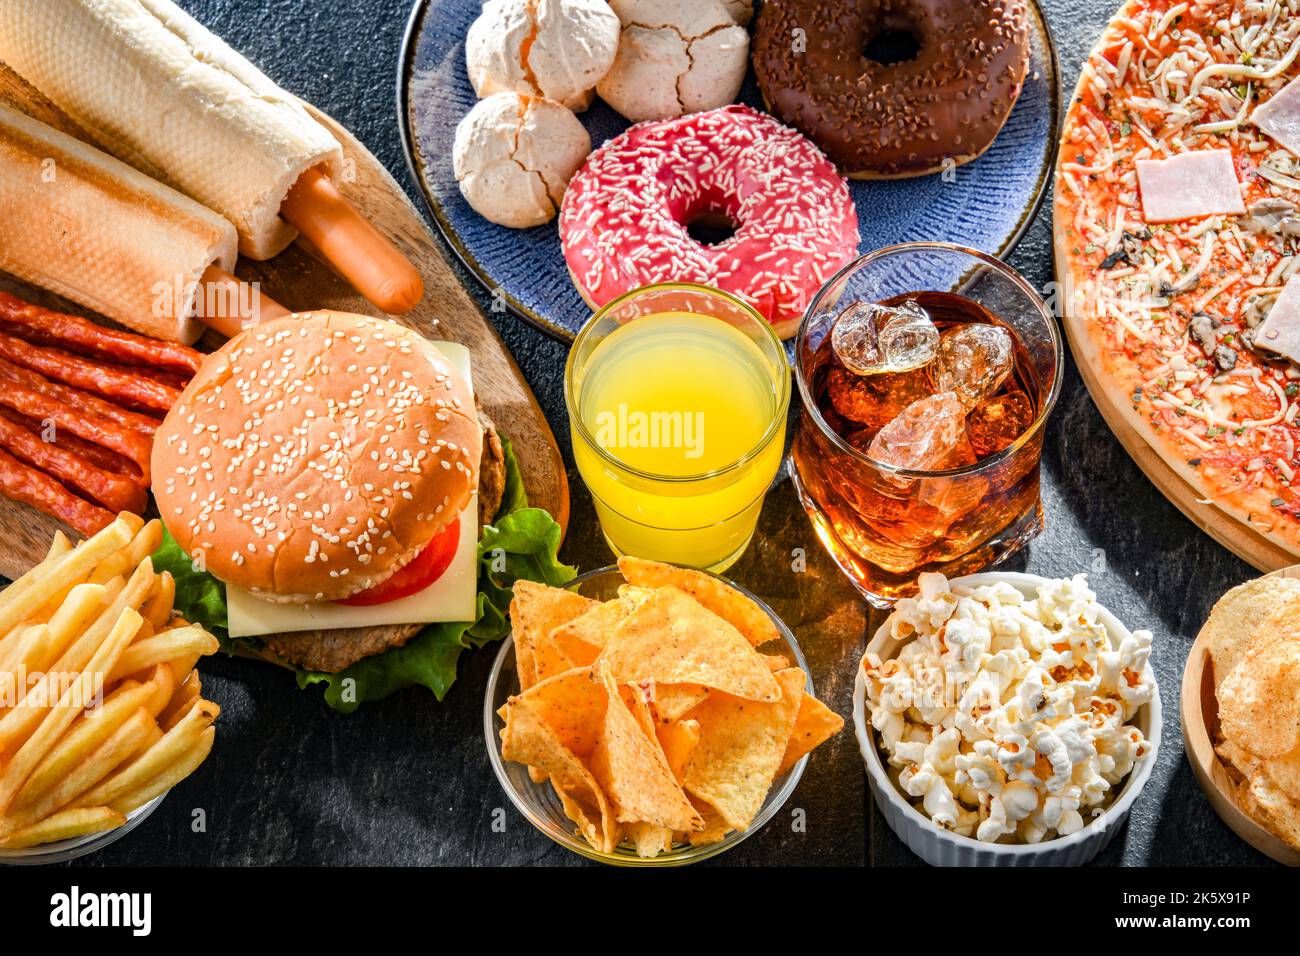 Foods enhancing the risk of cancer. Junk food Stock Photo